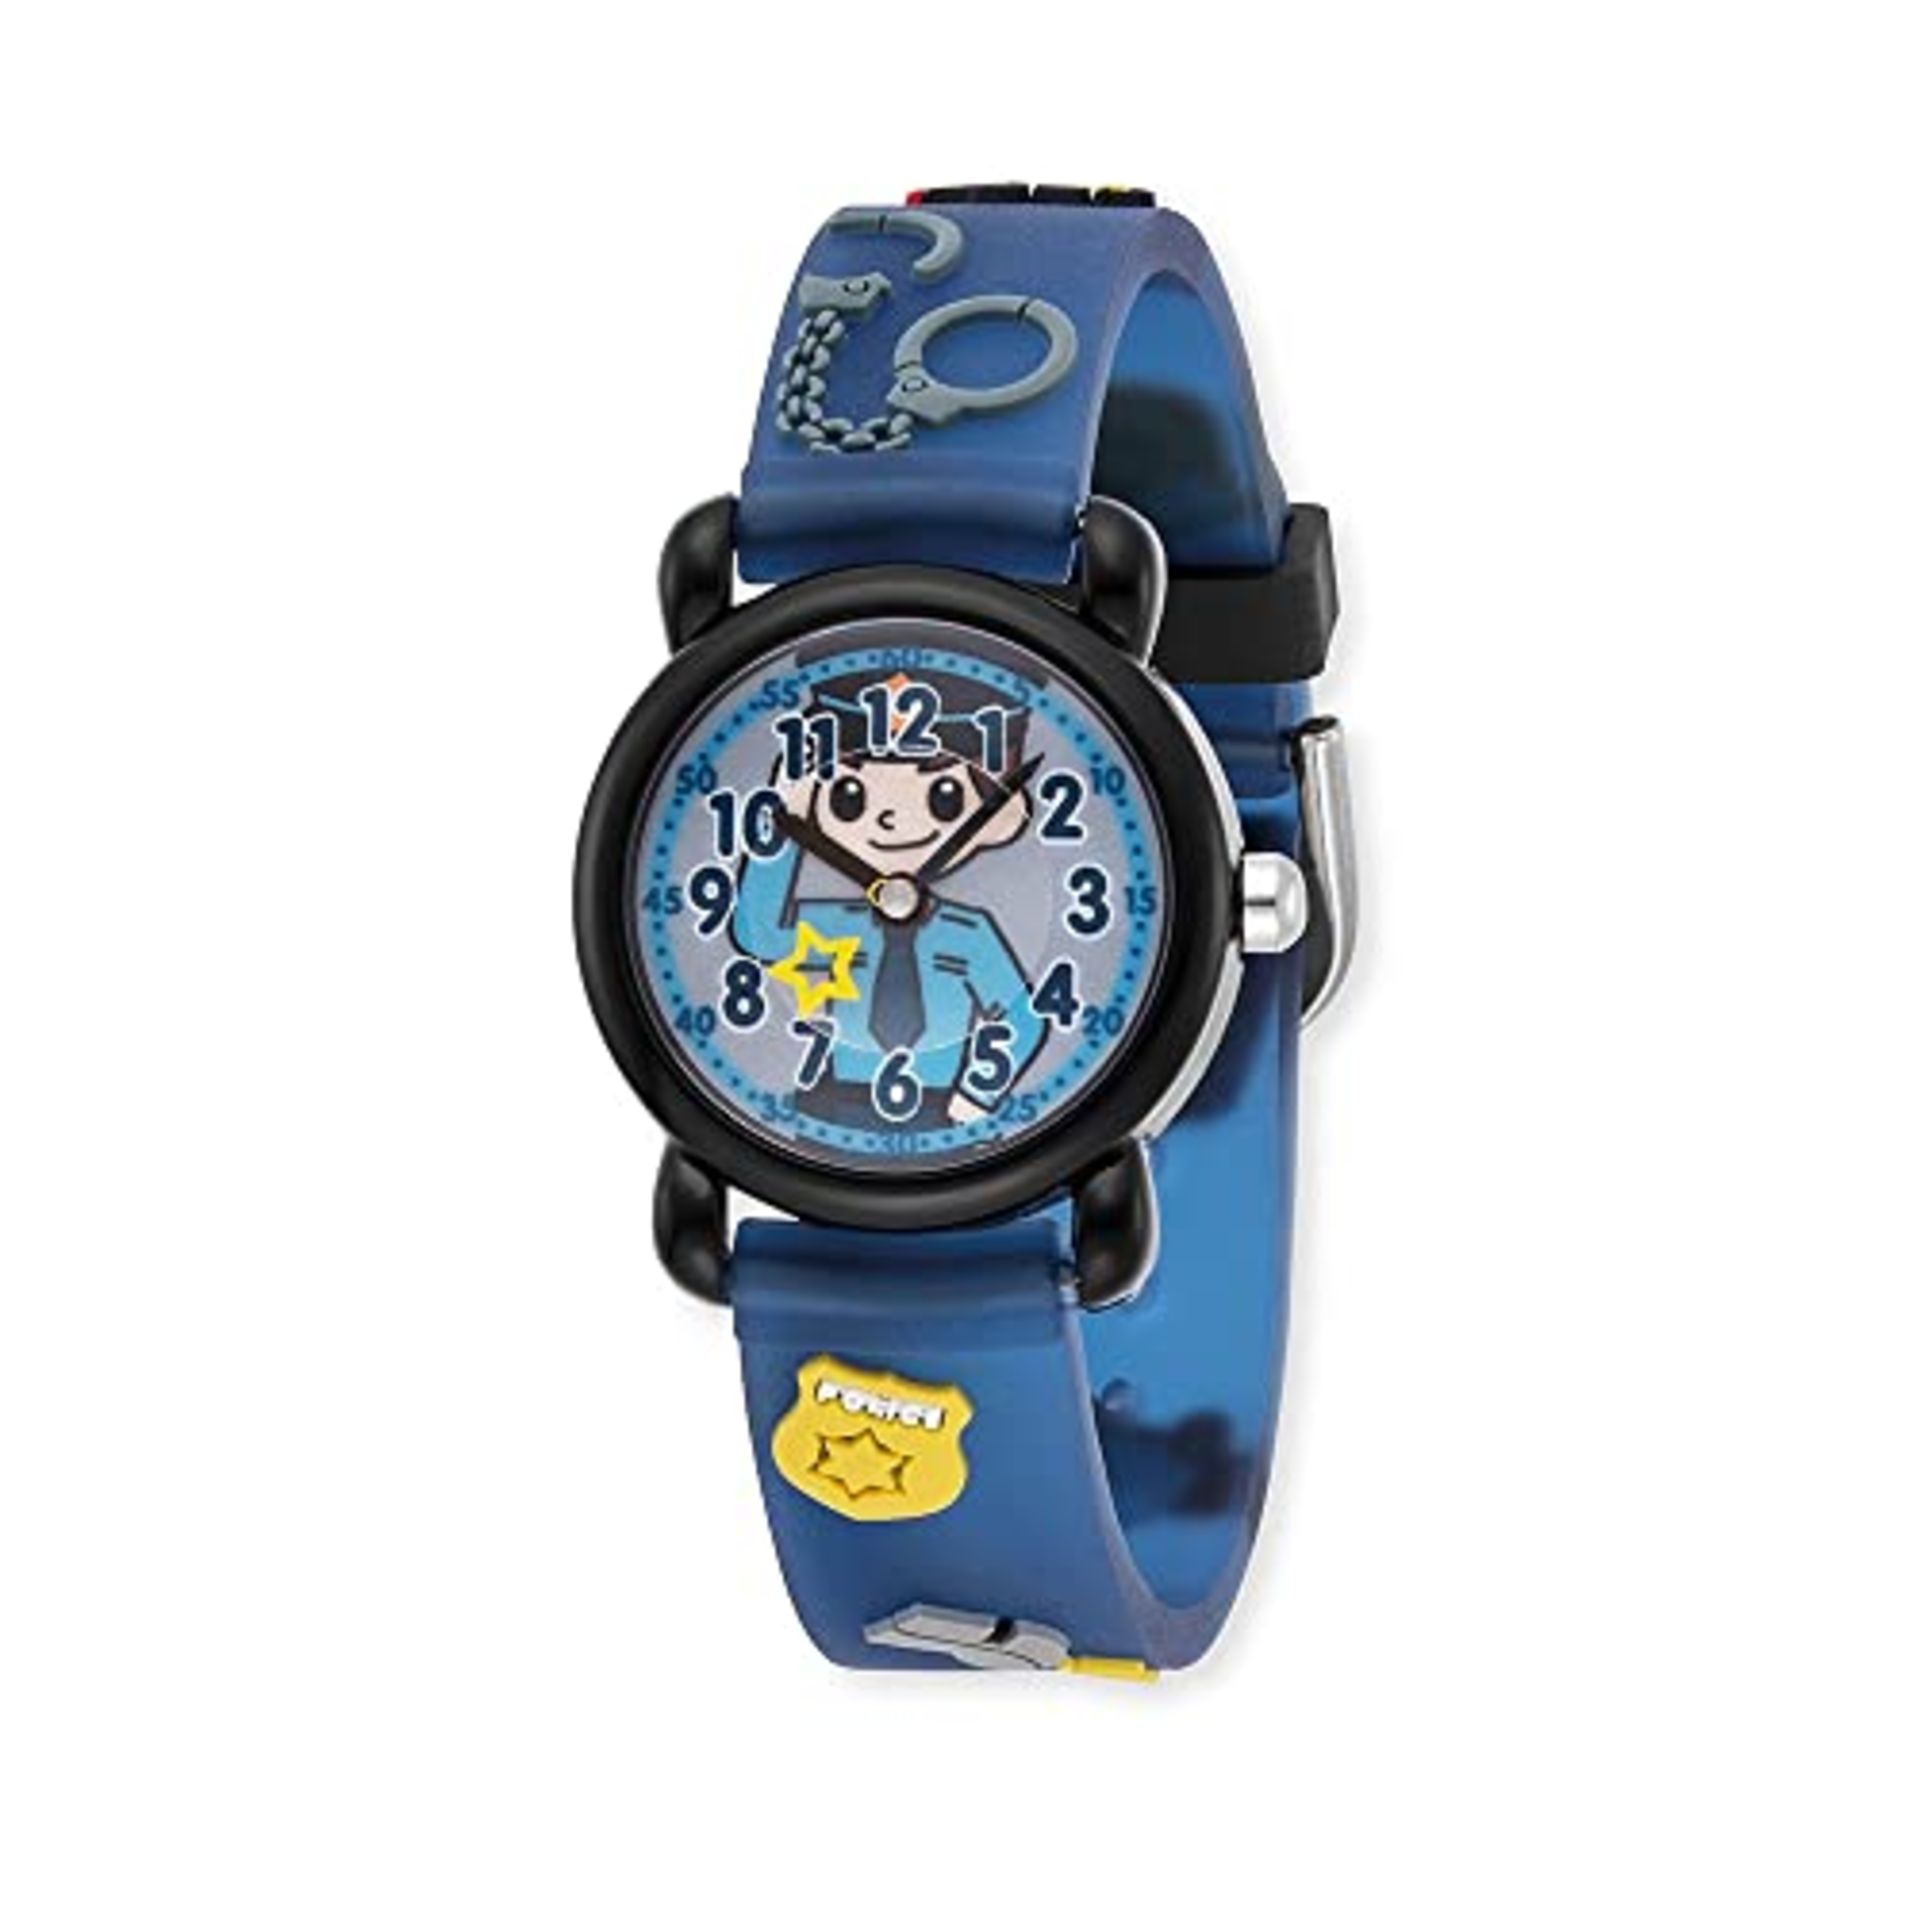 Heart angel analog wristwatch for children made of sturdy plastic with a soft plastic